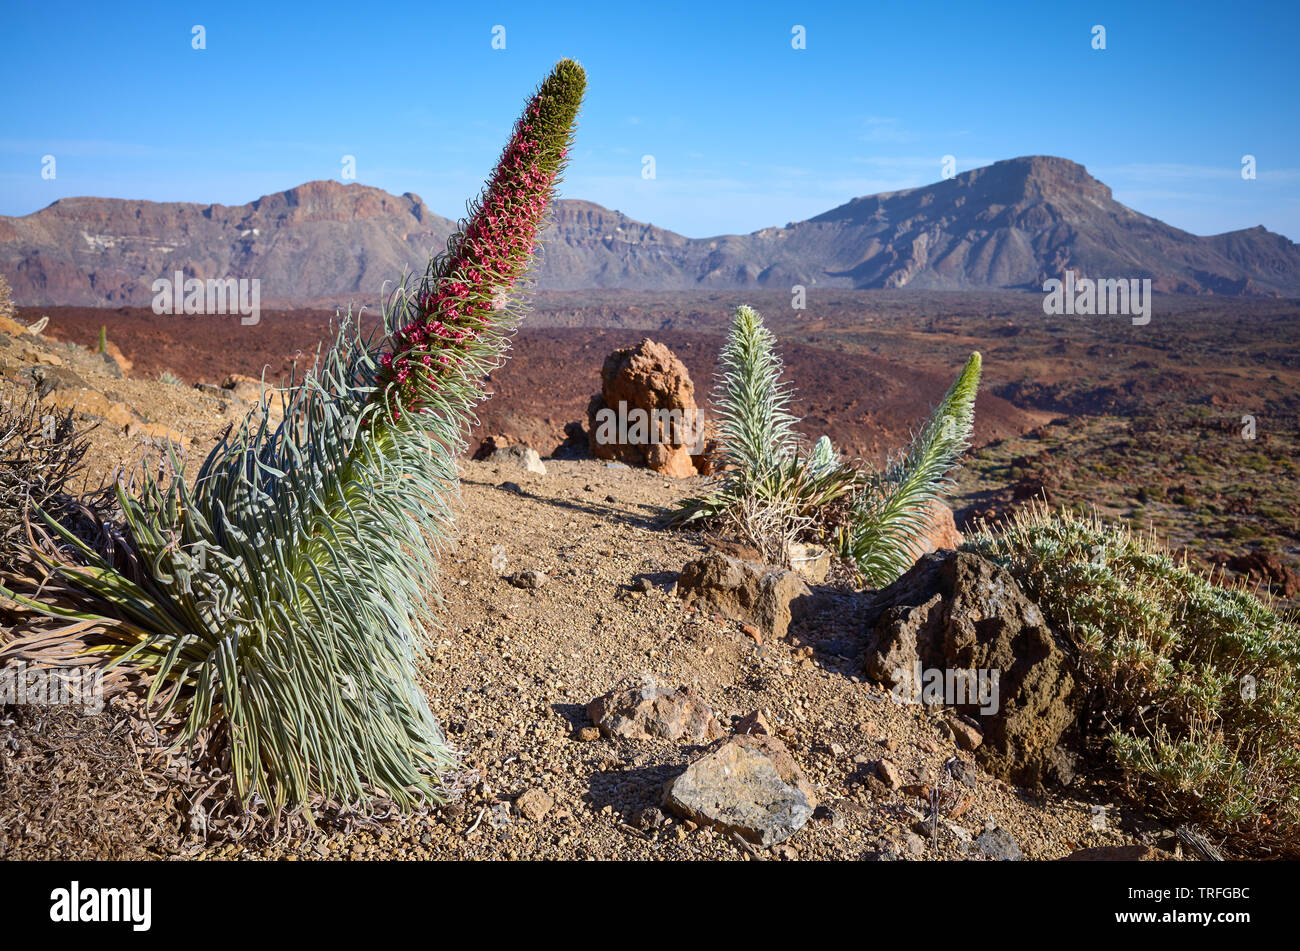 Tower of jewels (Echium wildpretii) plant, endemic species to the island of Tenerife in Teide National Park, Spain. Stock Photo